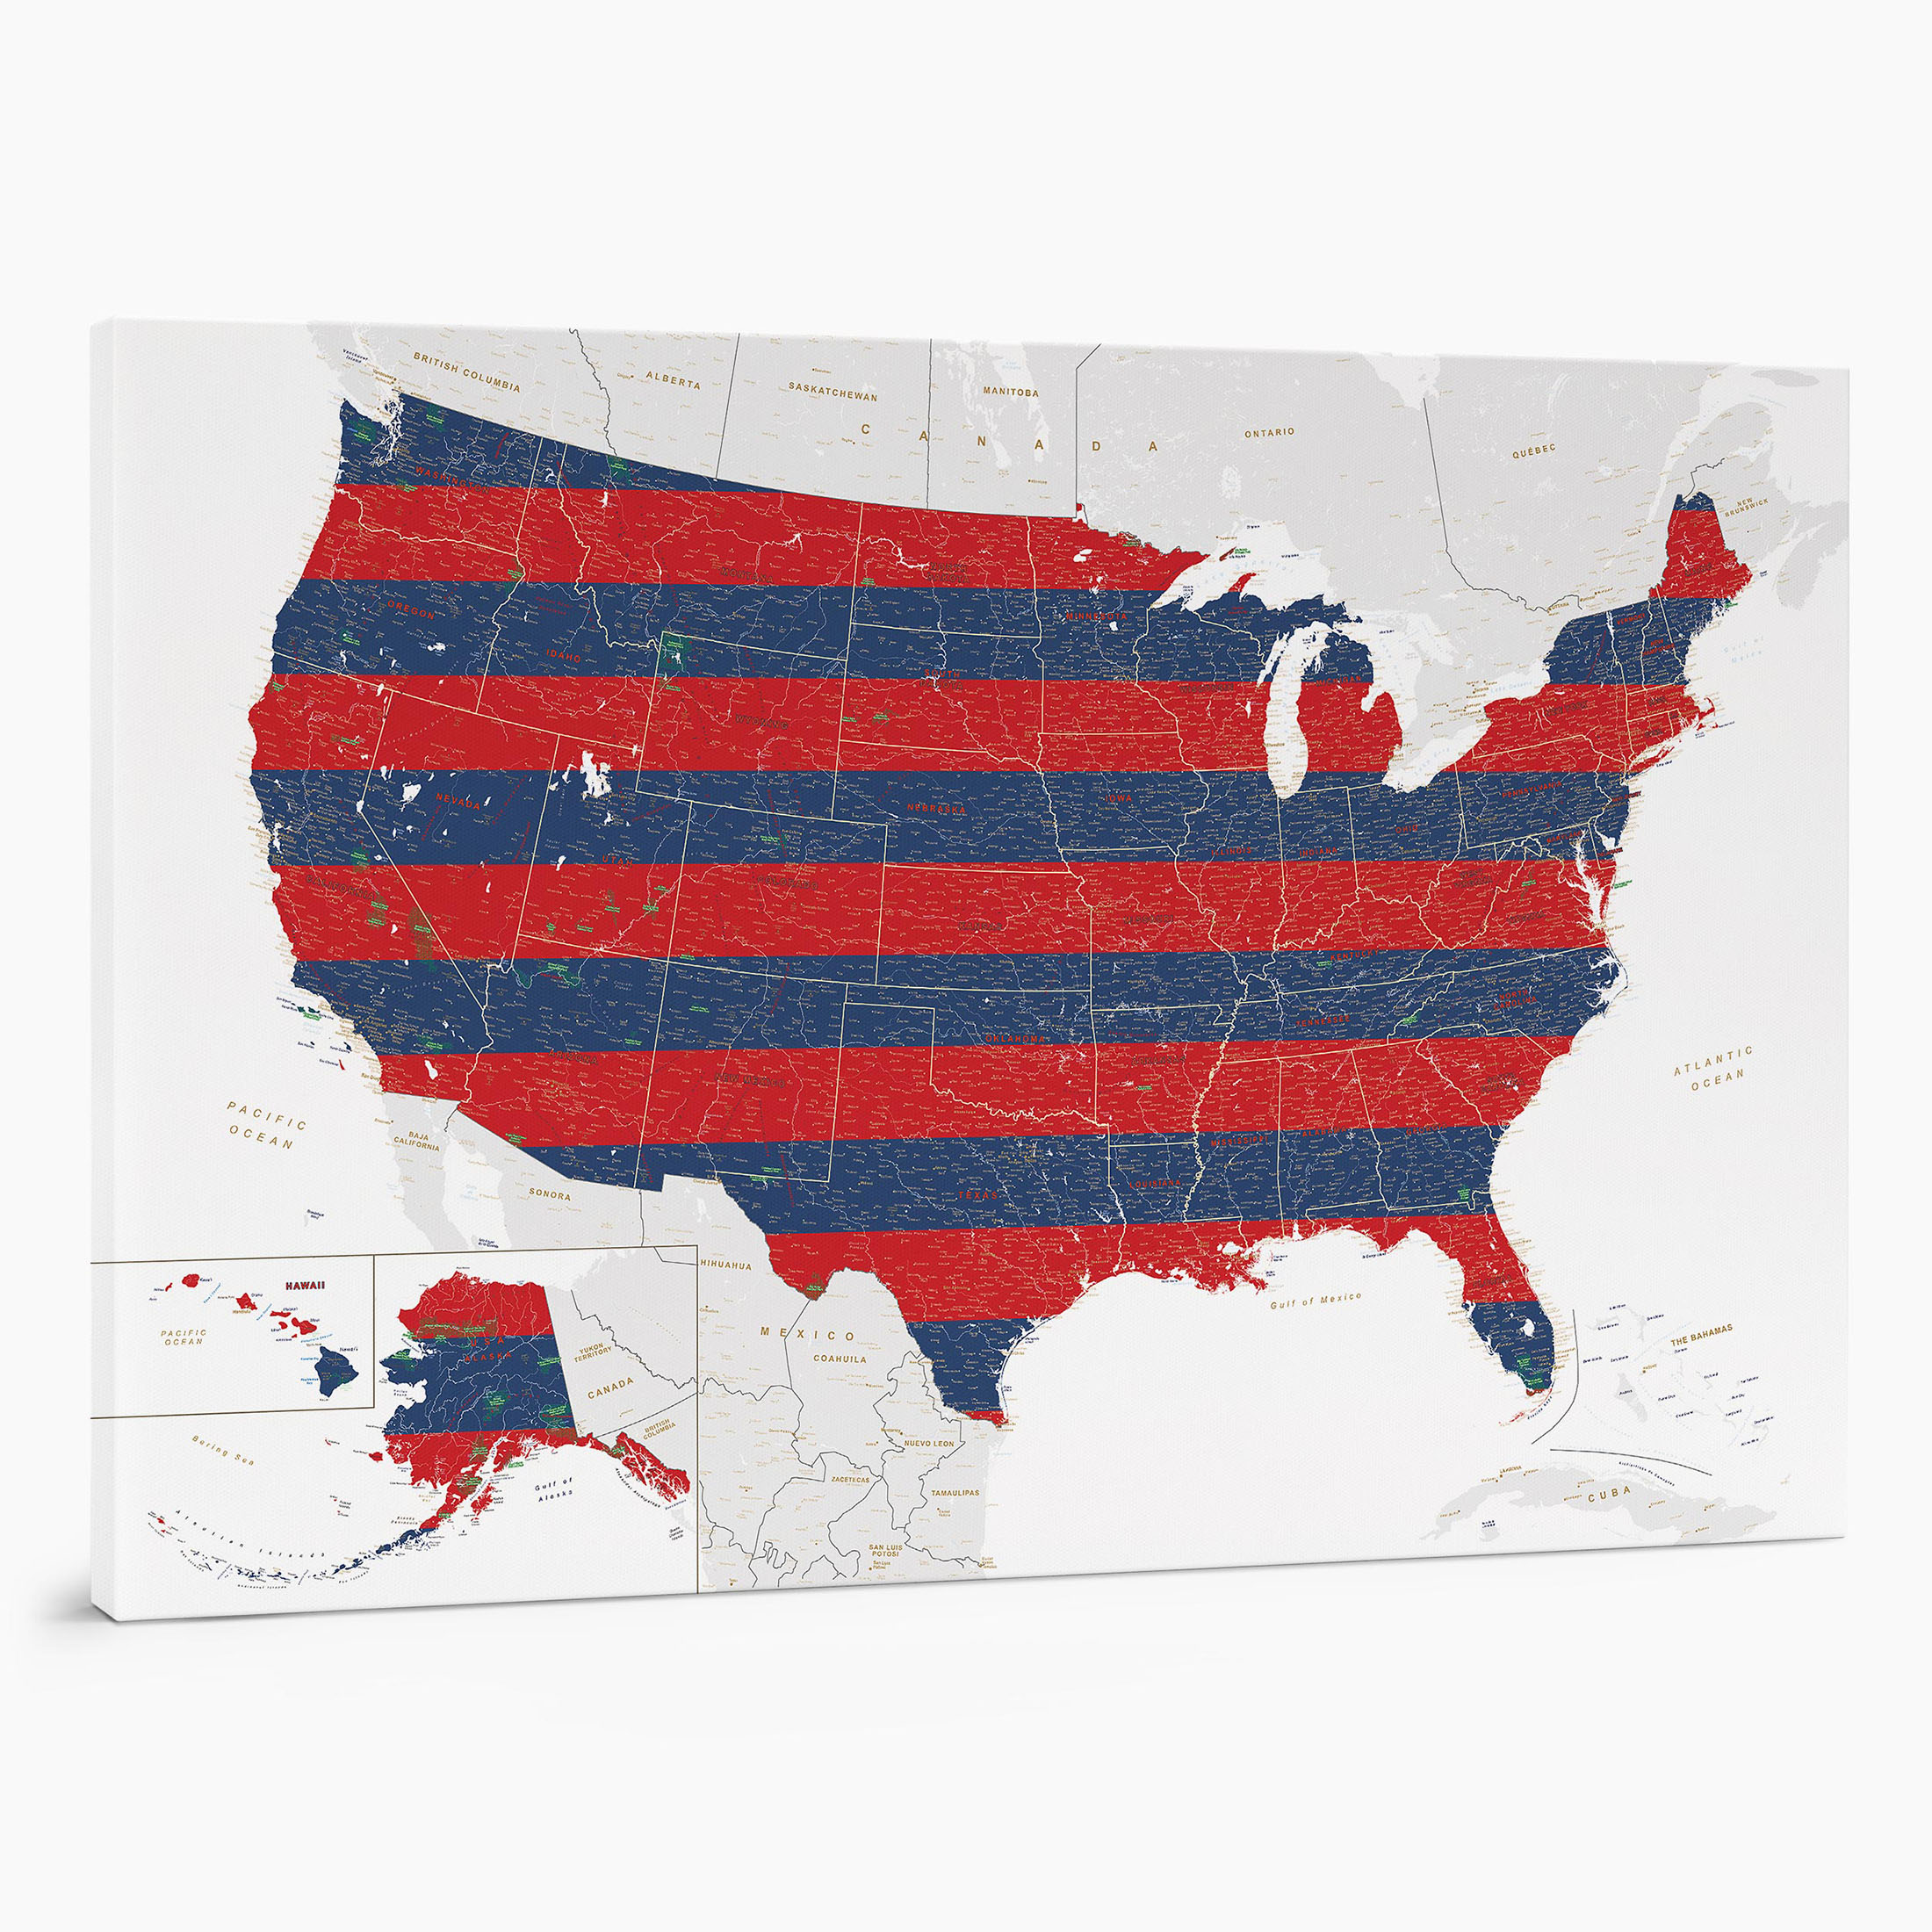 2USA large push pin usa map on canvas to mark visited places 4 july